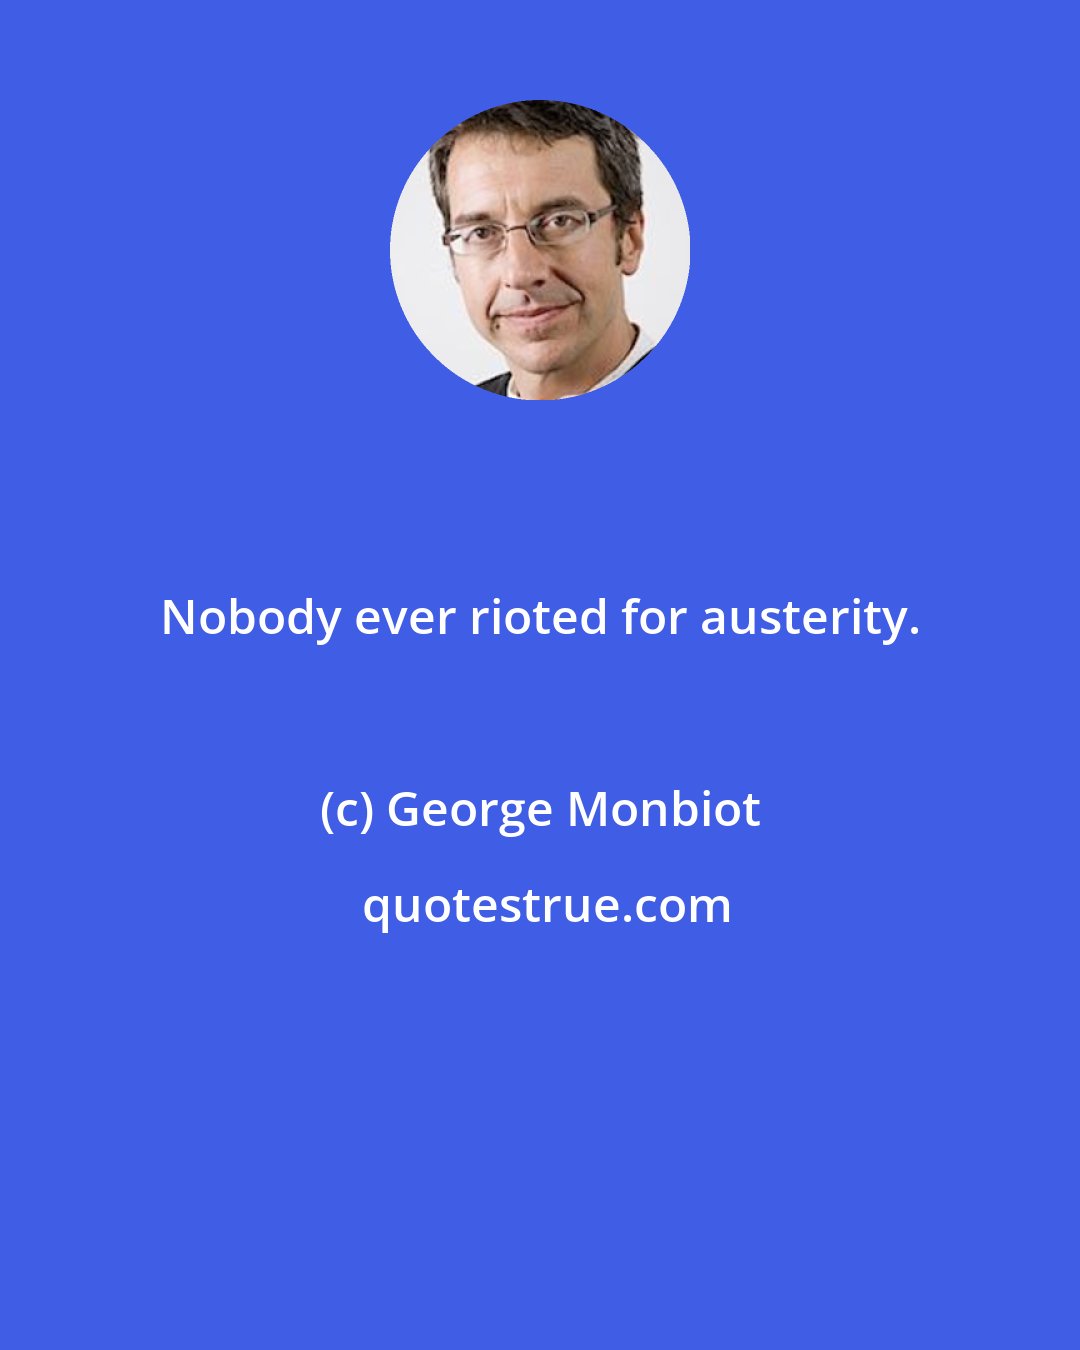 George Monbiot: Nobody ever rioted for austerity.